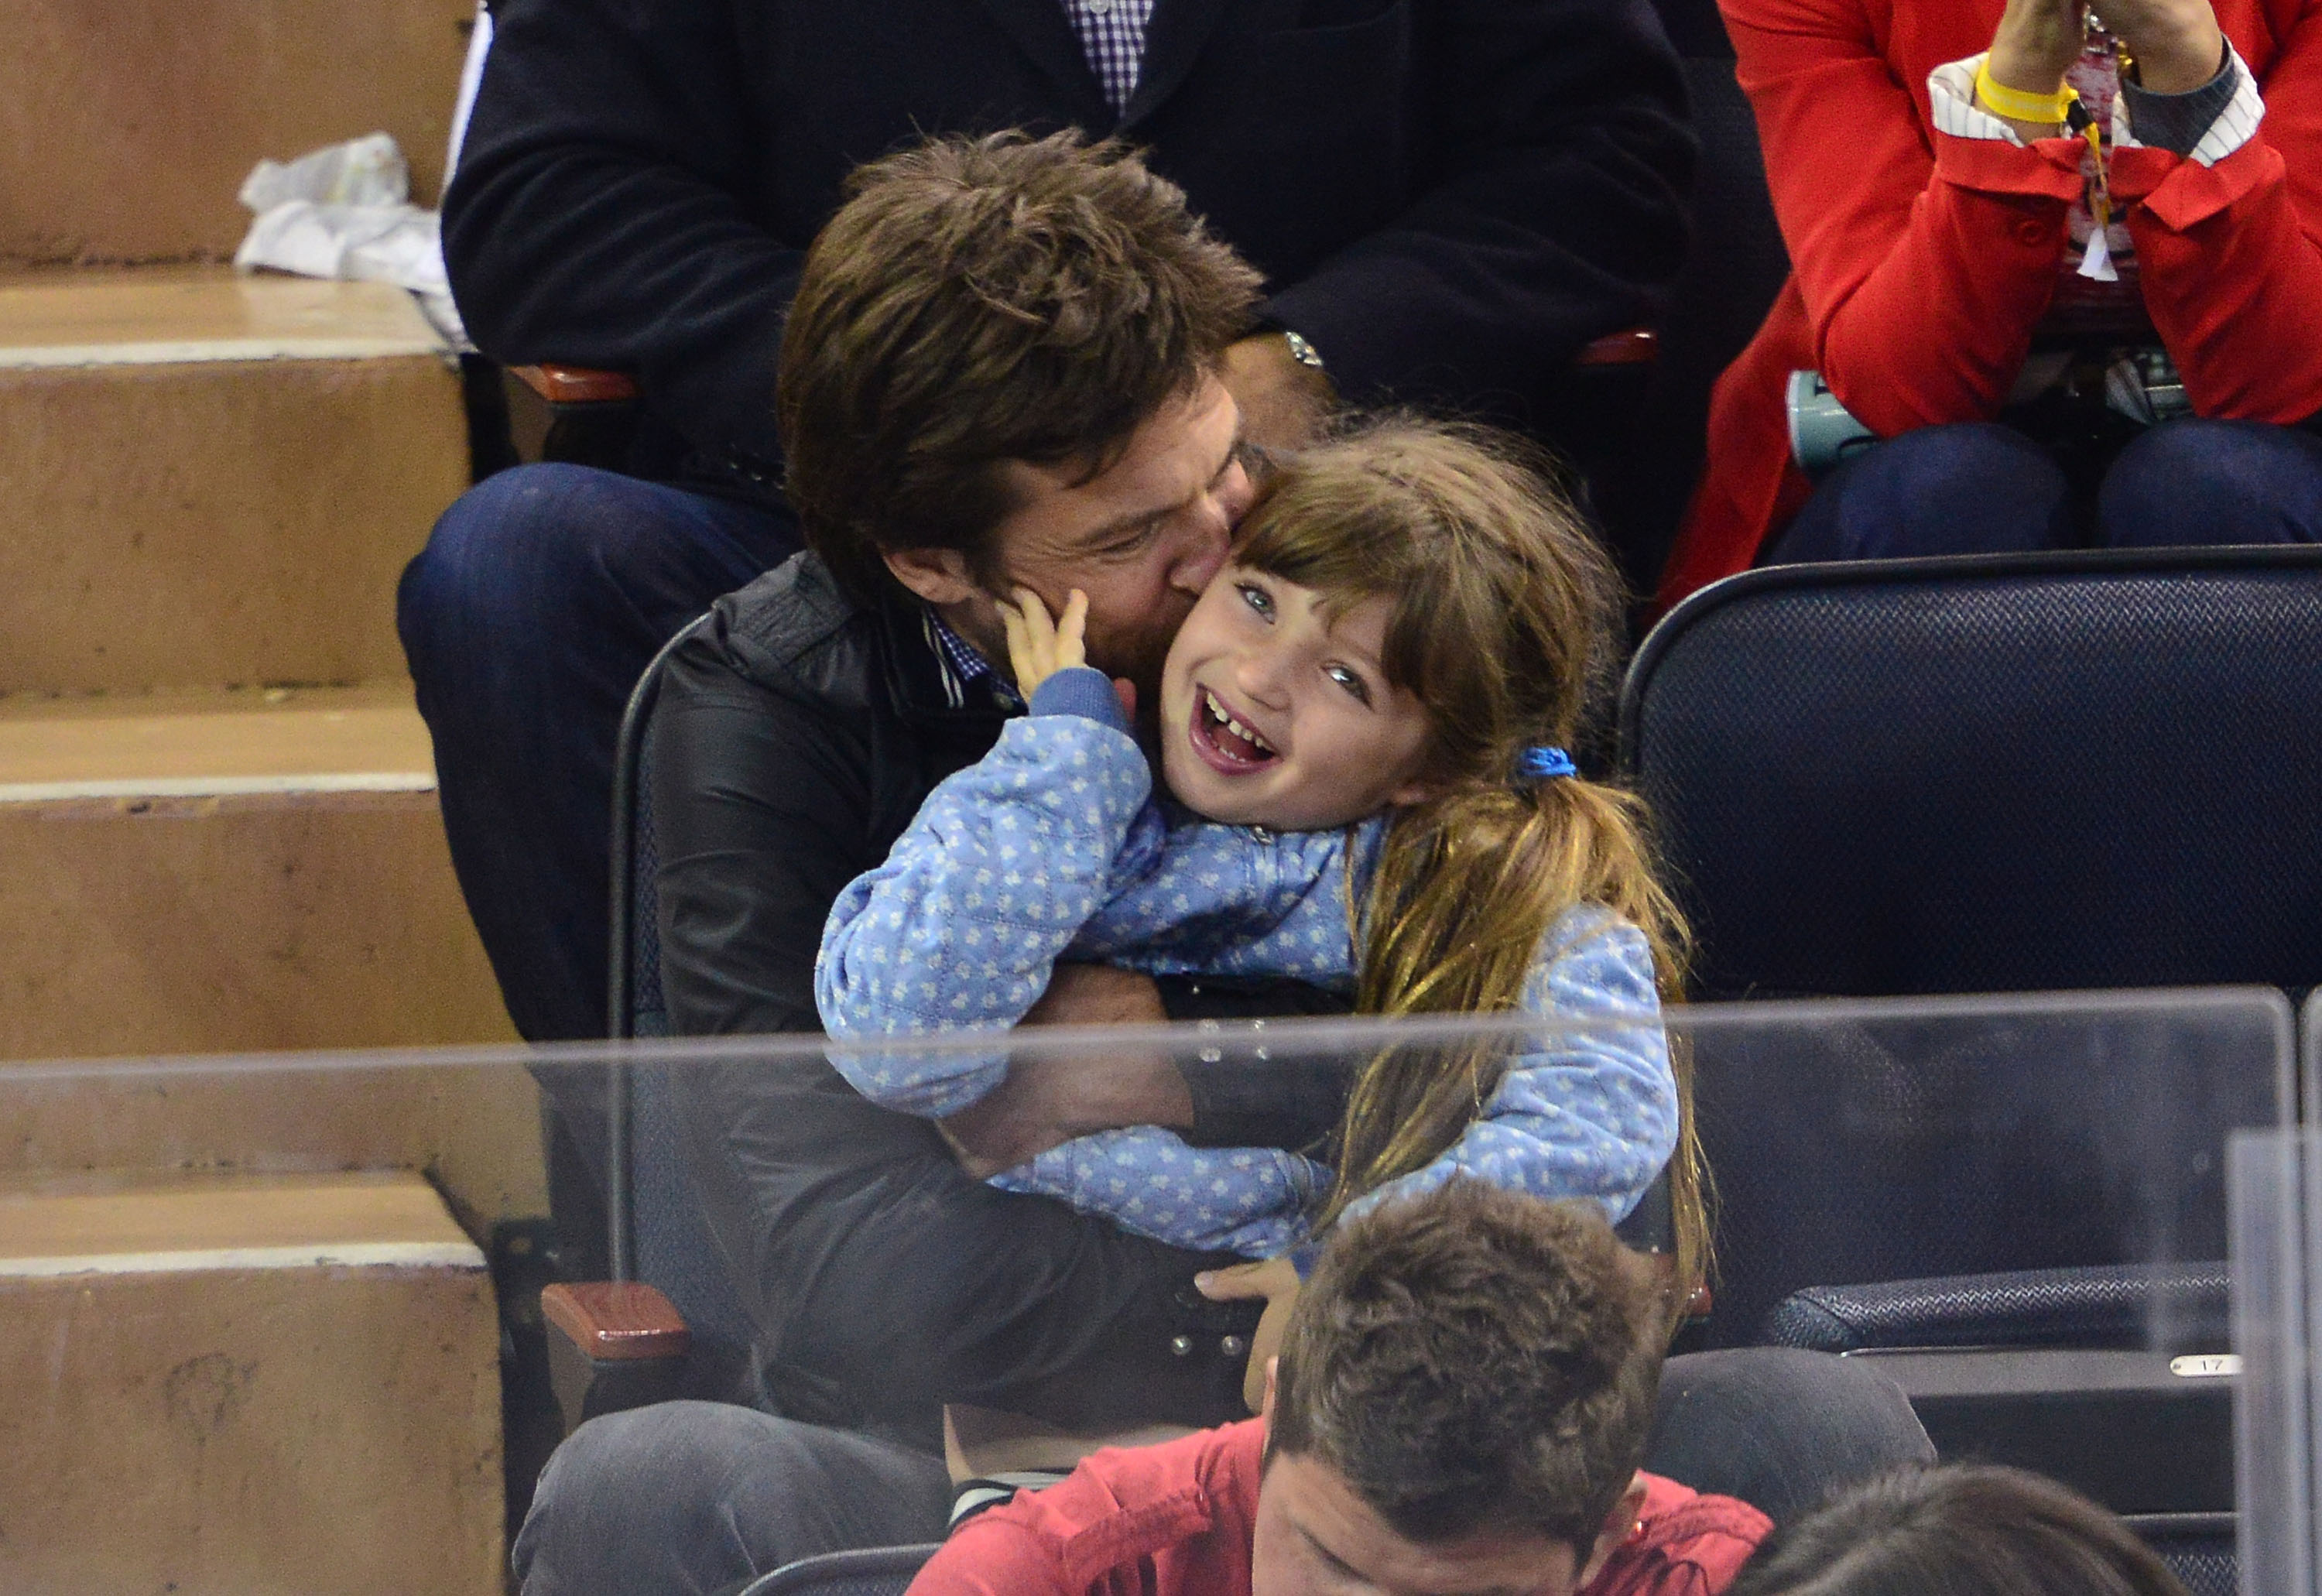 Jason Bateman and daughter Francesca Bateman attend the Boston Bruins Vs New York Rangers game at Madison Square Garden on May 23, 2013, in New York City | Source: Getty Images